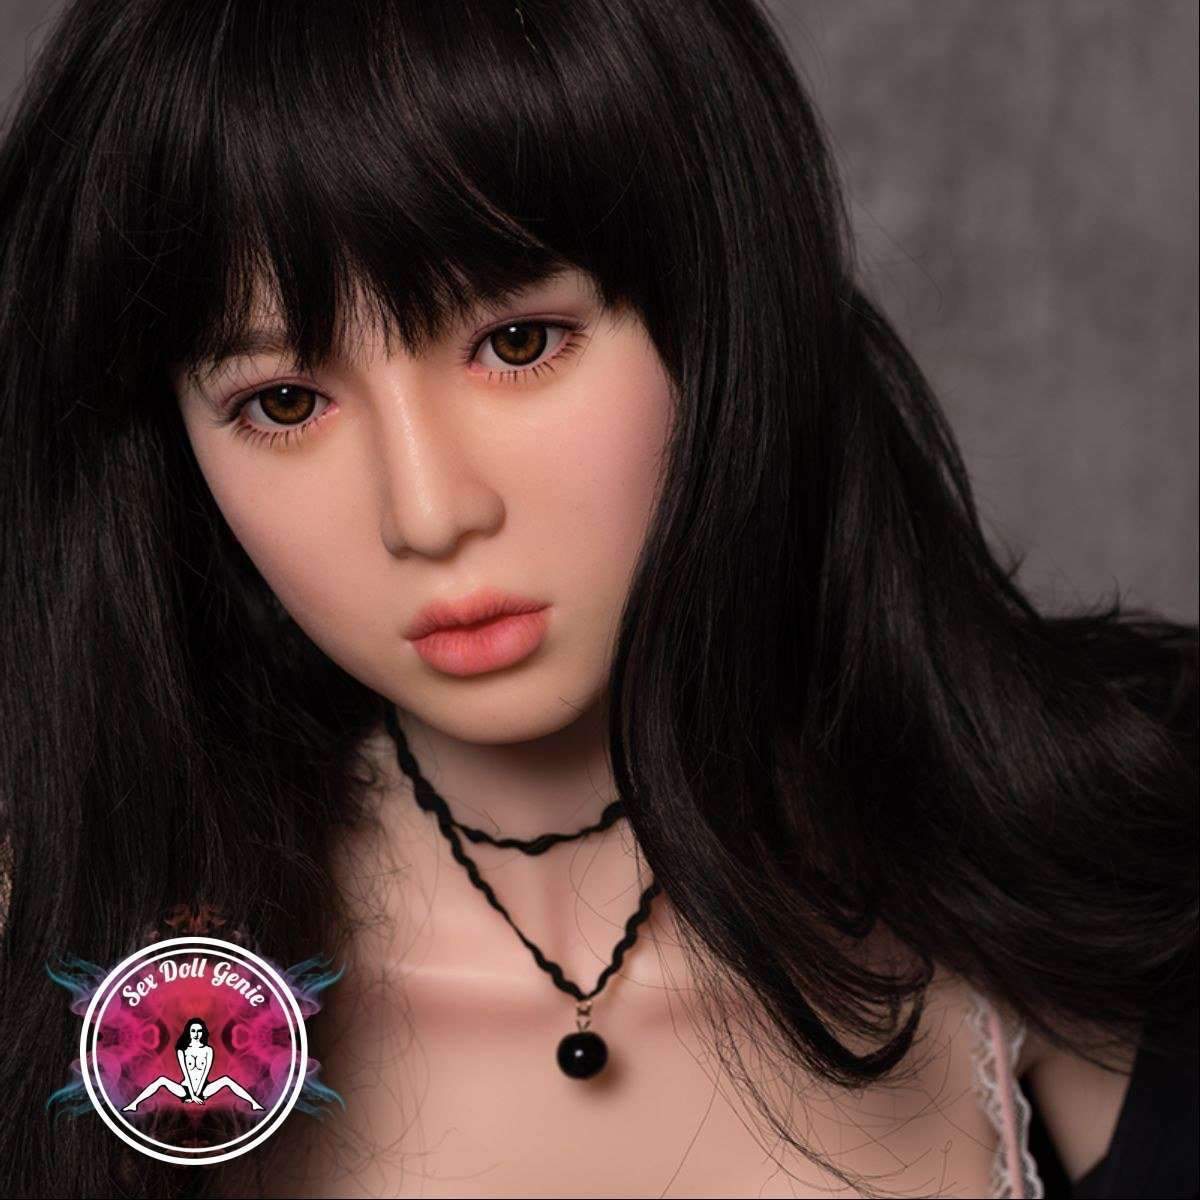 DS Doll - 167evo - Leaf Head - Type 1 D Cup Silicone Doll-2